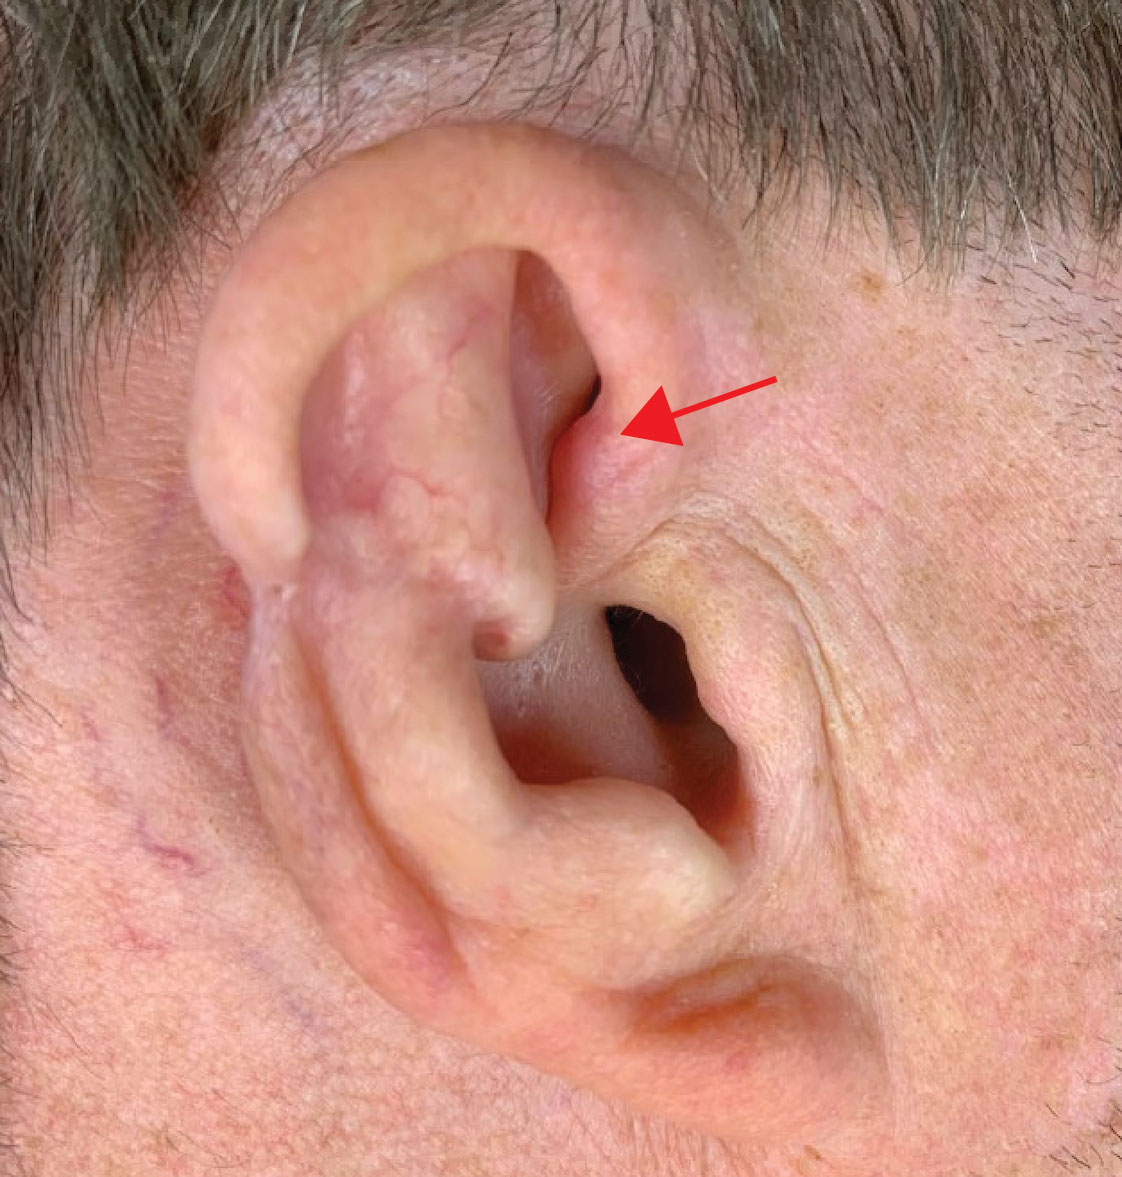 Following radiation therapy, chondrodermatitis nodularis helicis (arrow) developed outside the surgical scar but within the adjuvant radiation portal.